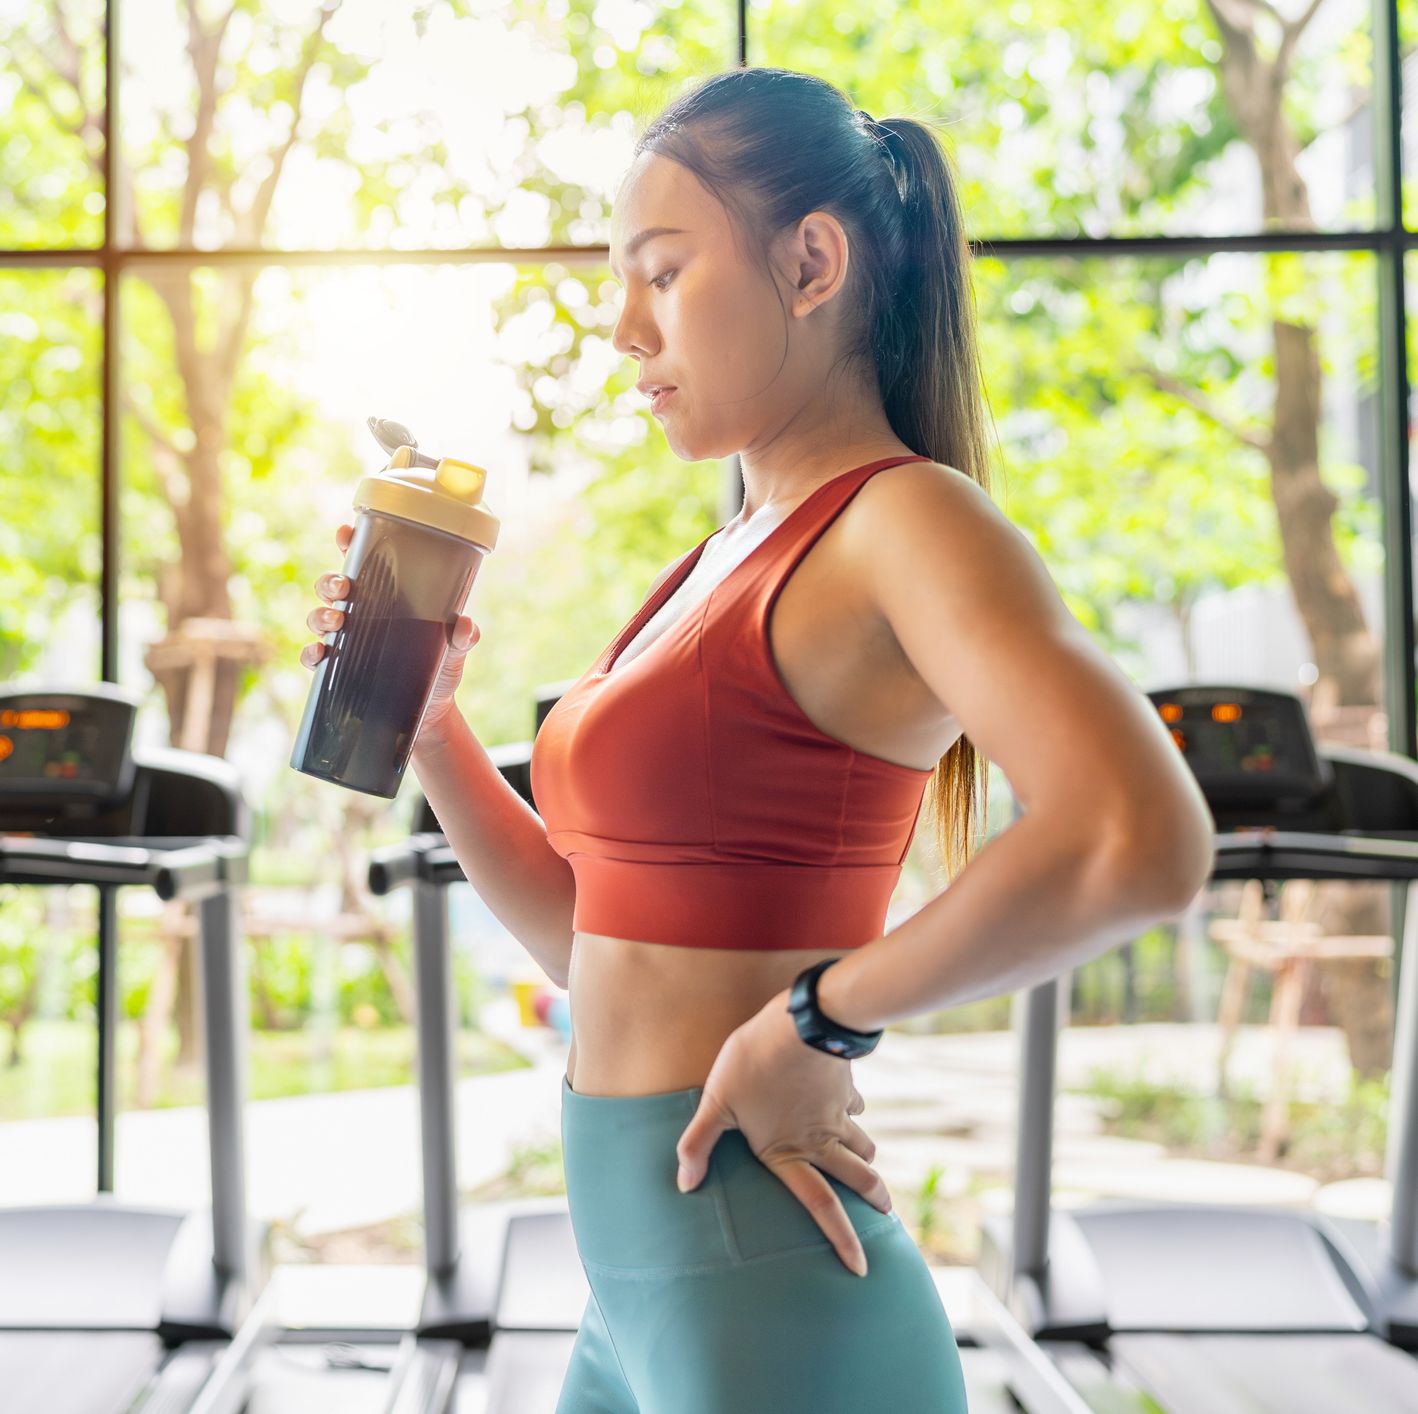 What Should You Eat Before a Morning Workout?